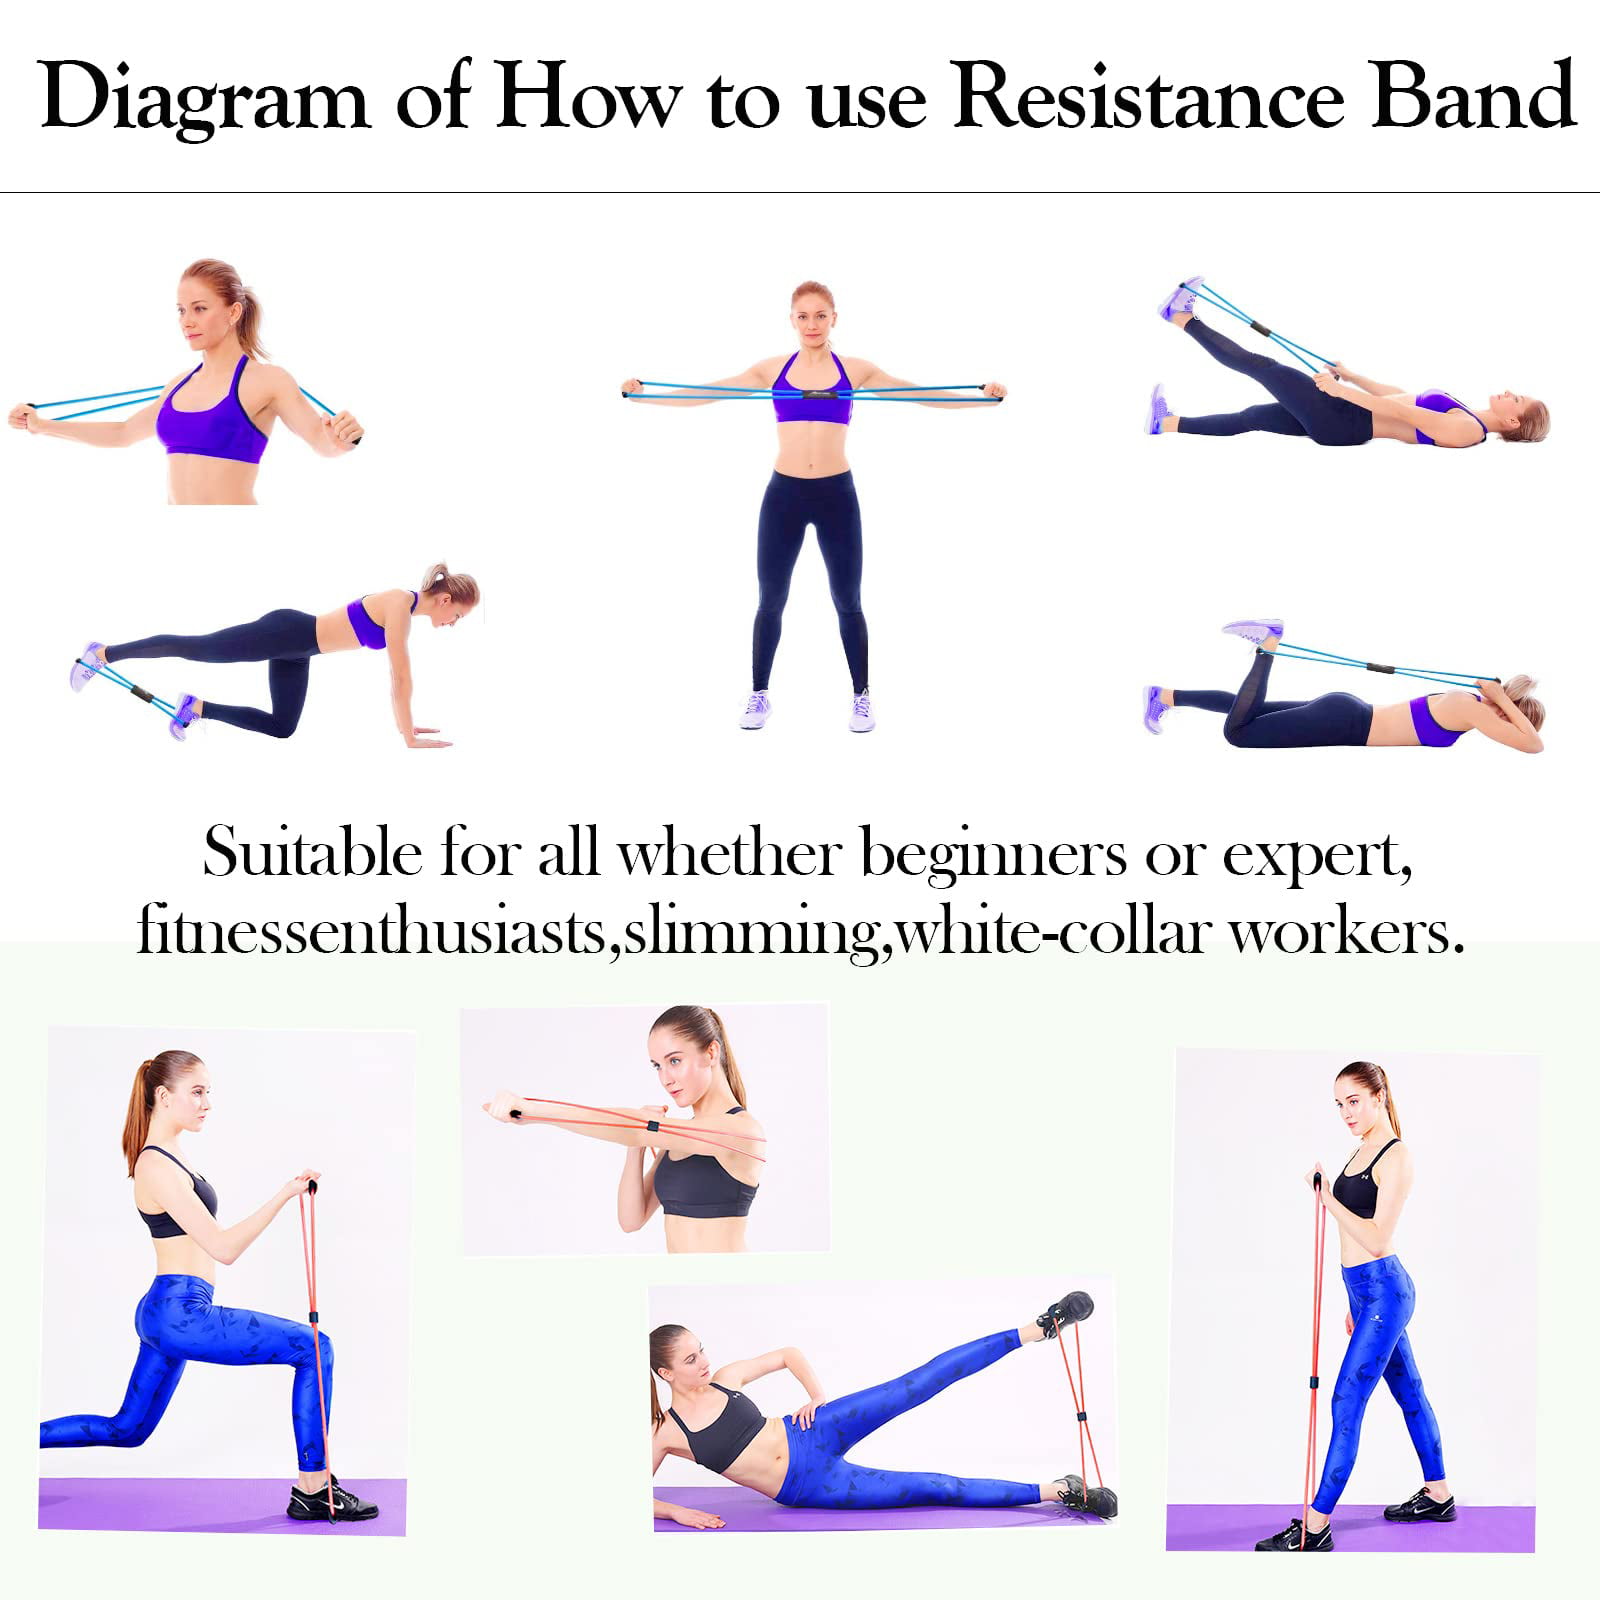 8 Effective Tips for How To Use Exercise Bands